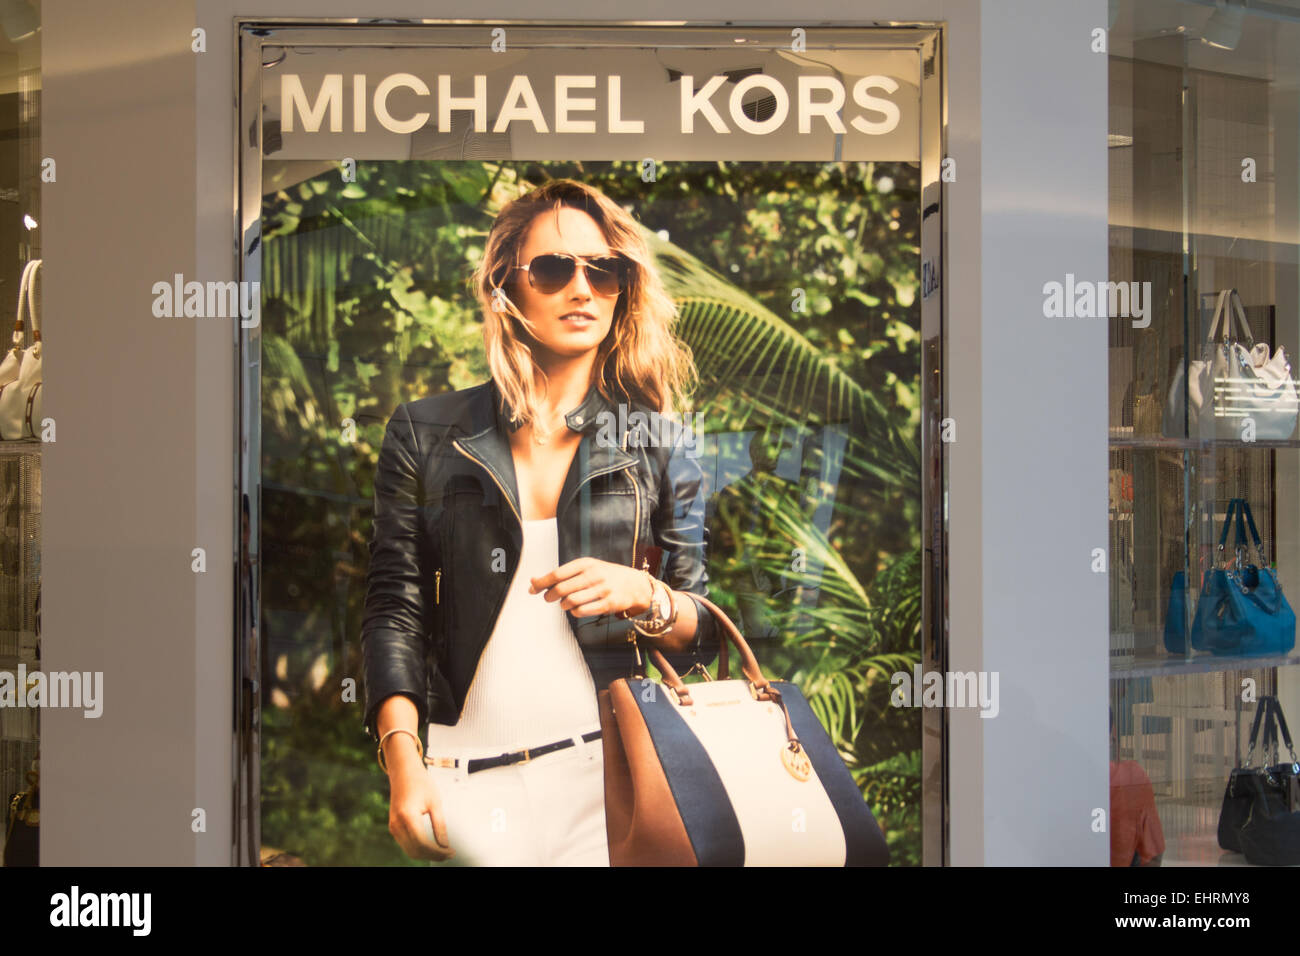 michael kors outlet in chicago